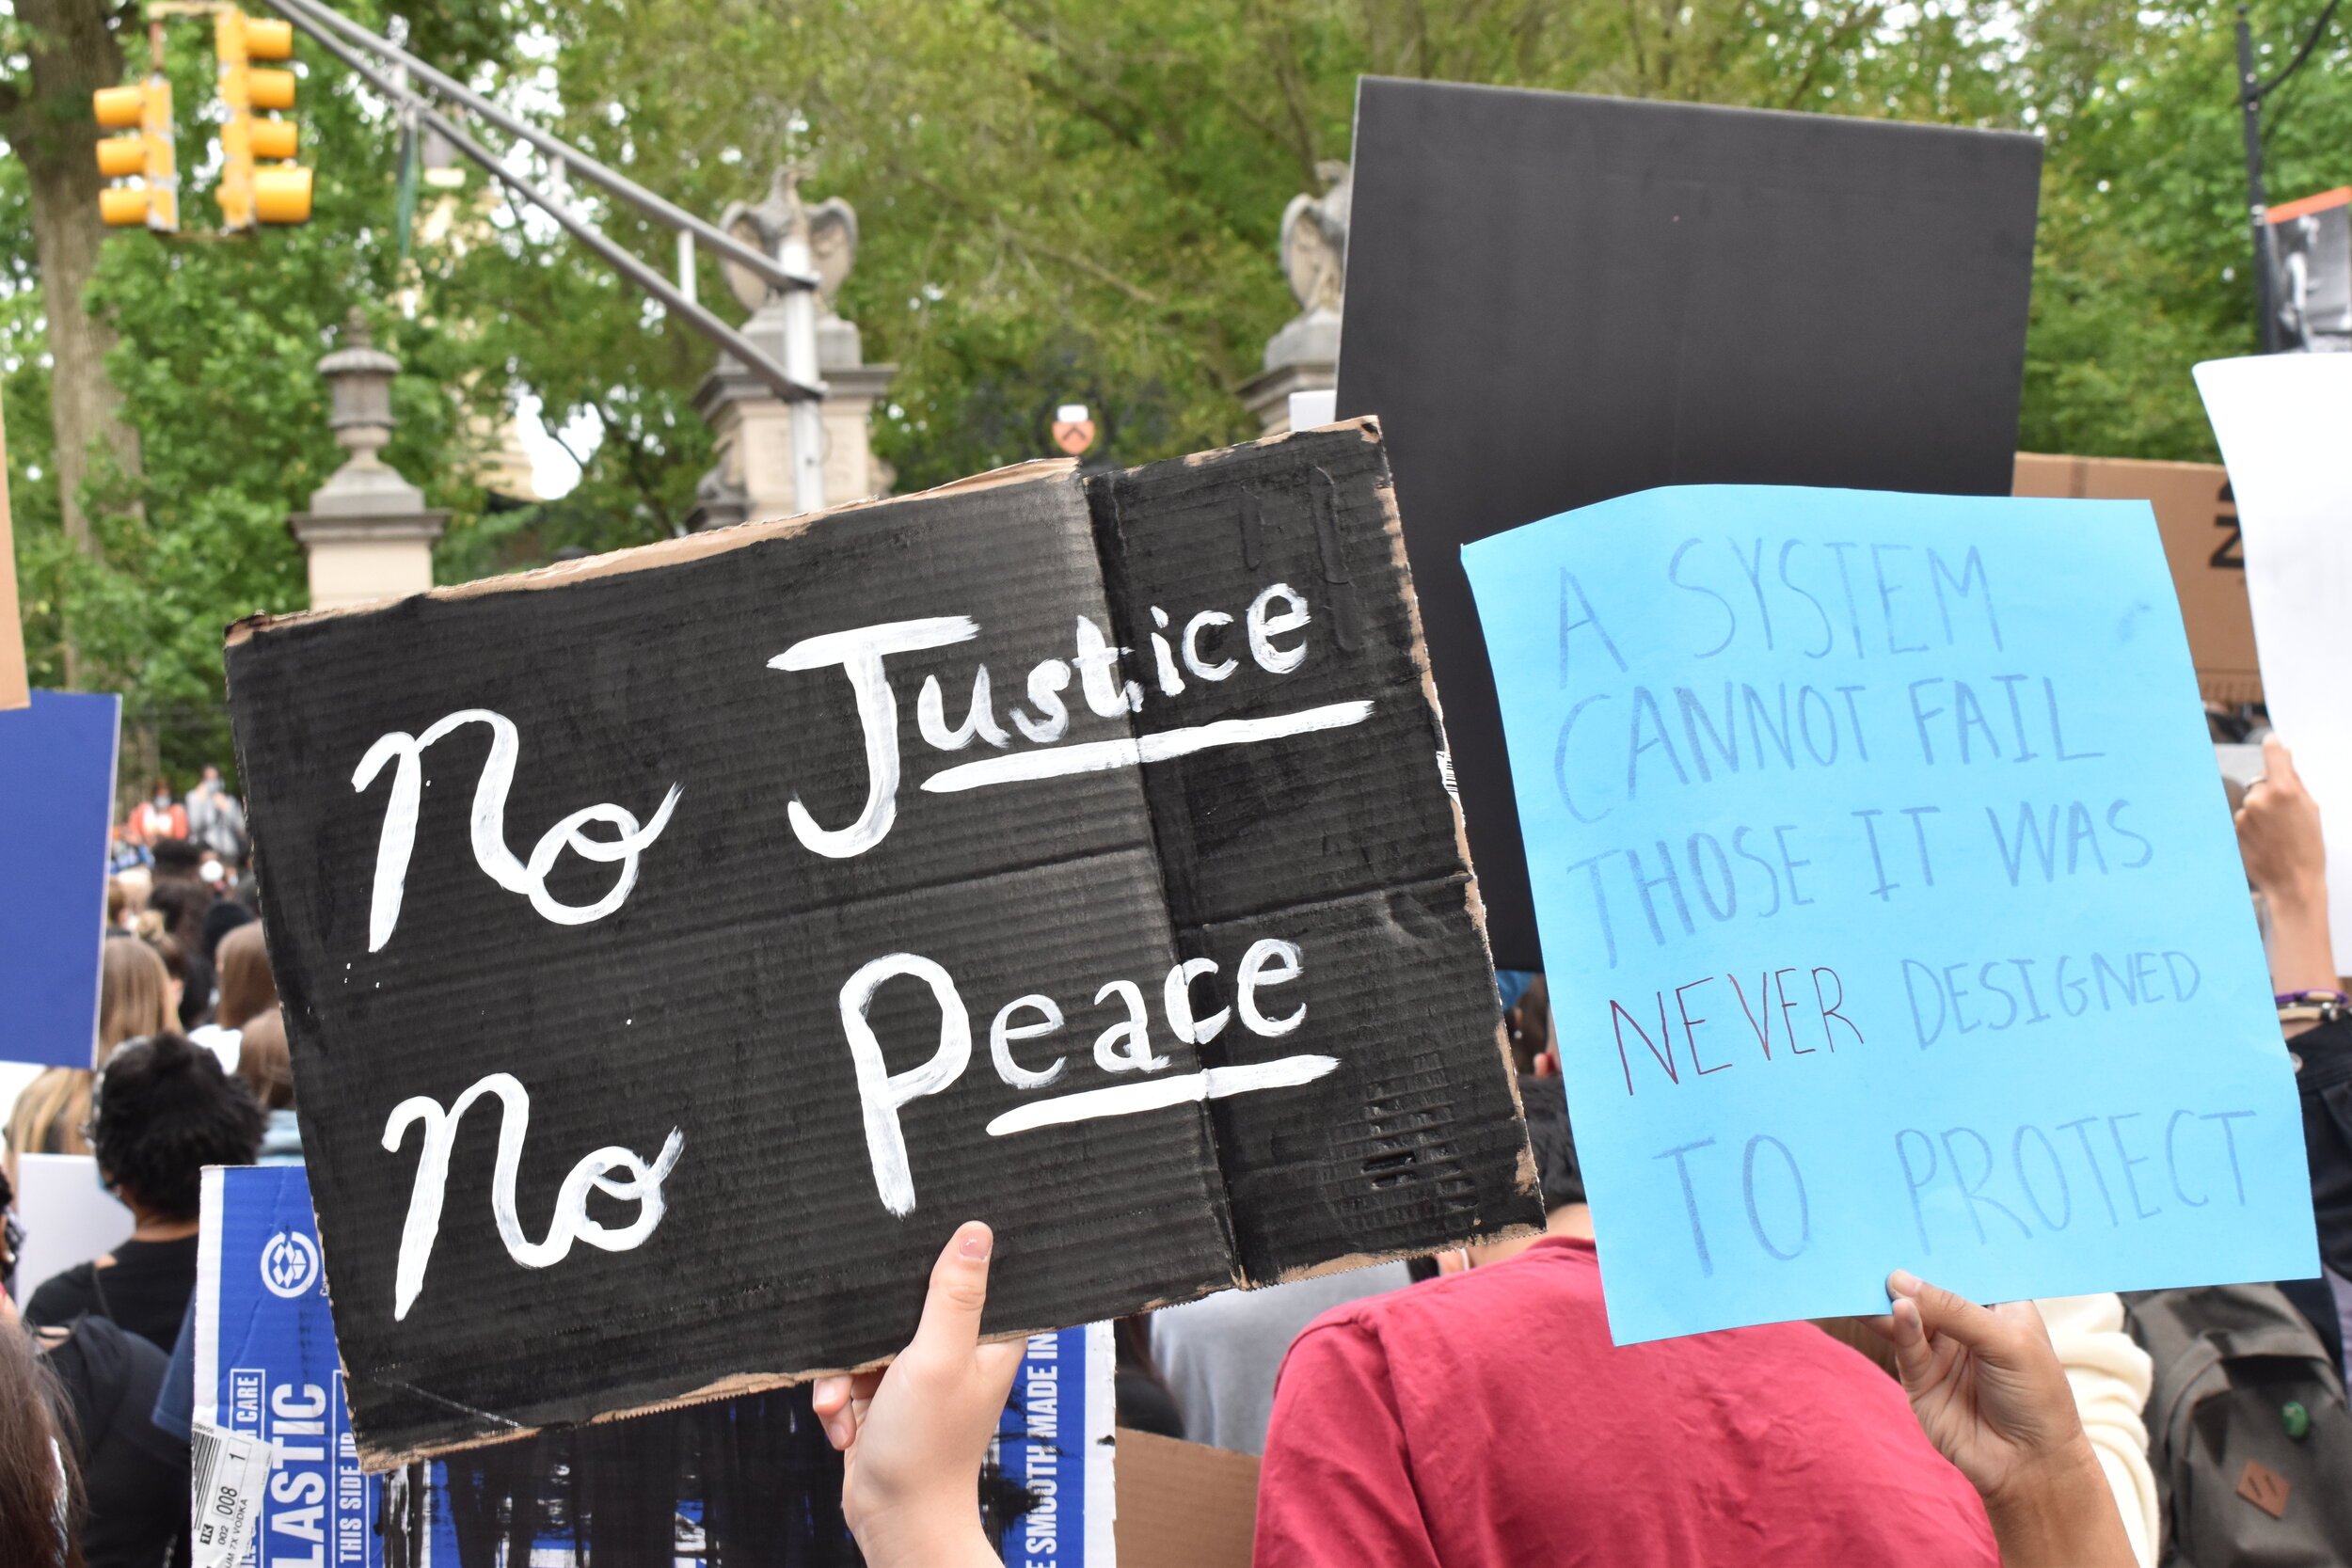  Protestors held up signs at a rally in Princeton, New Jersey on Tuesday, June 2, 2020.  Photo by: Madison Mento  